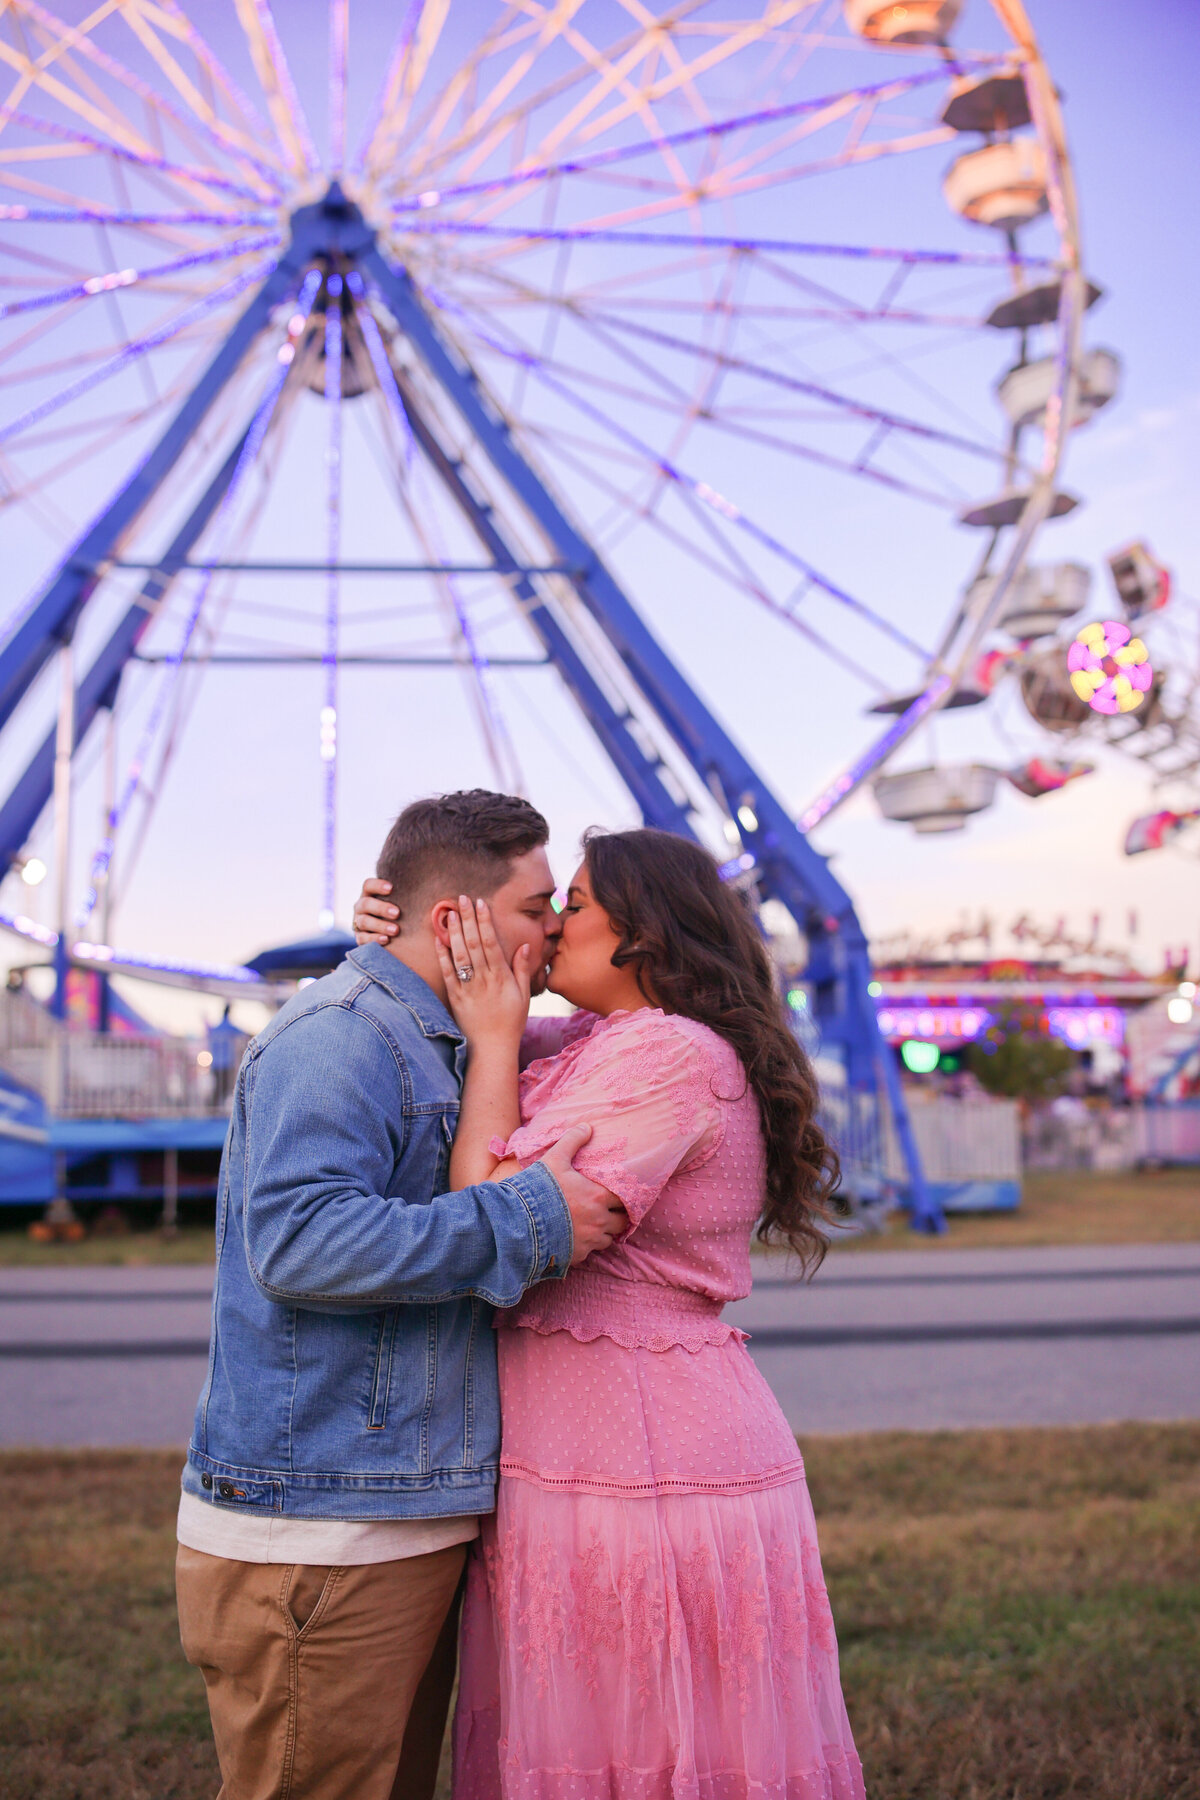 man and woman kissing with a ferris wheel in the background at sunset